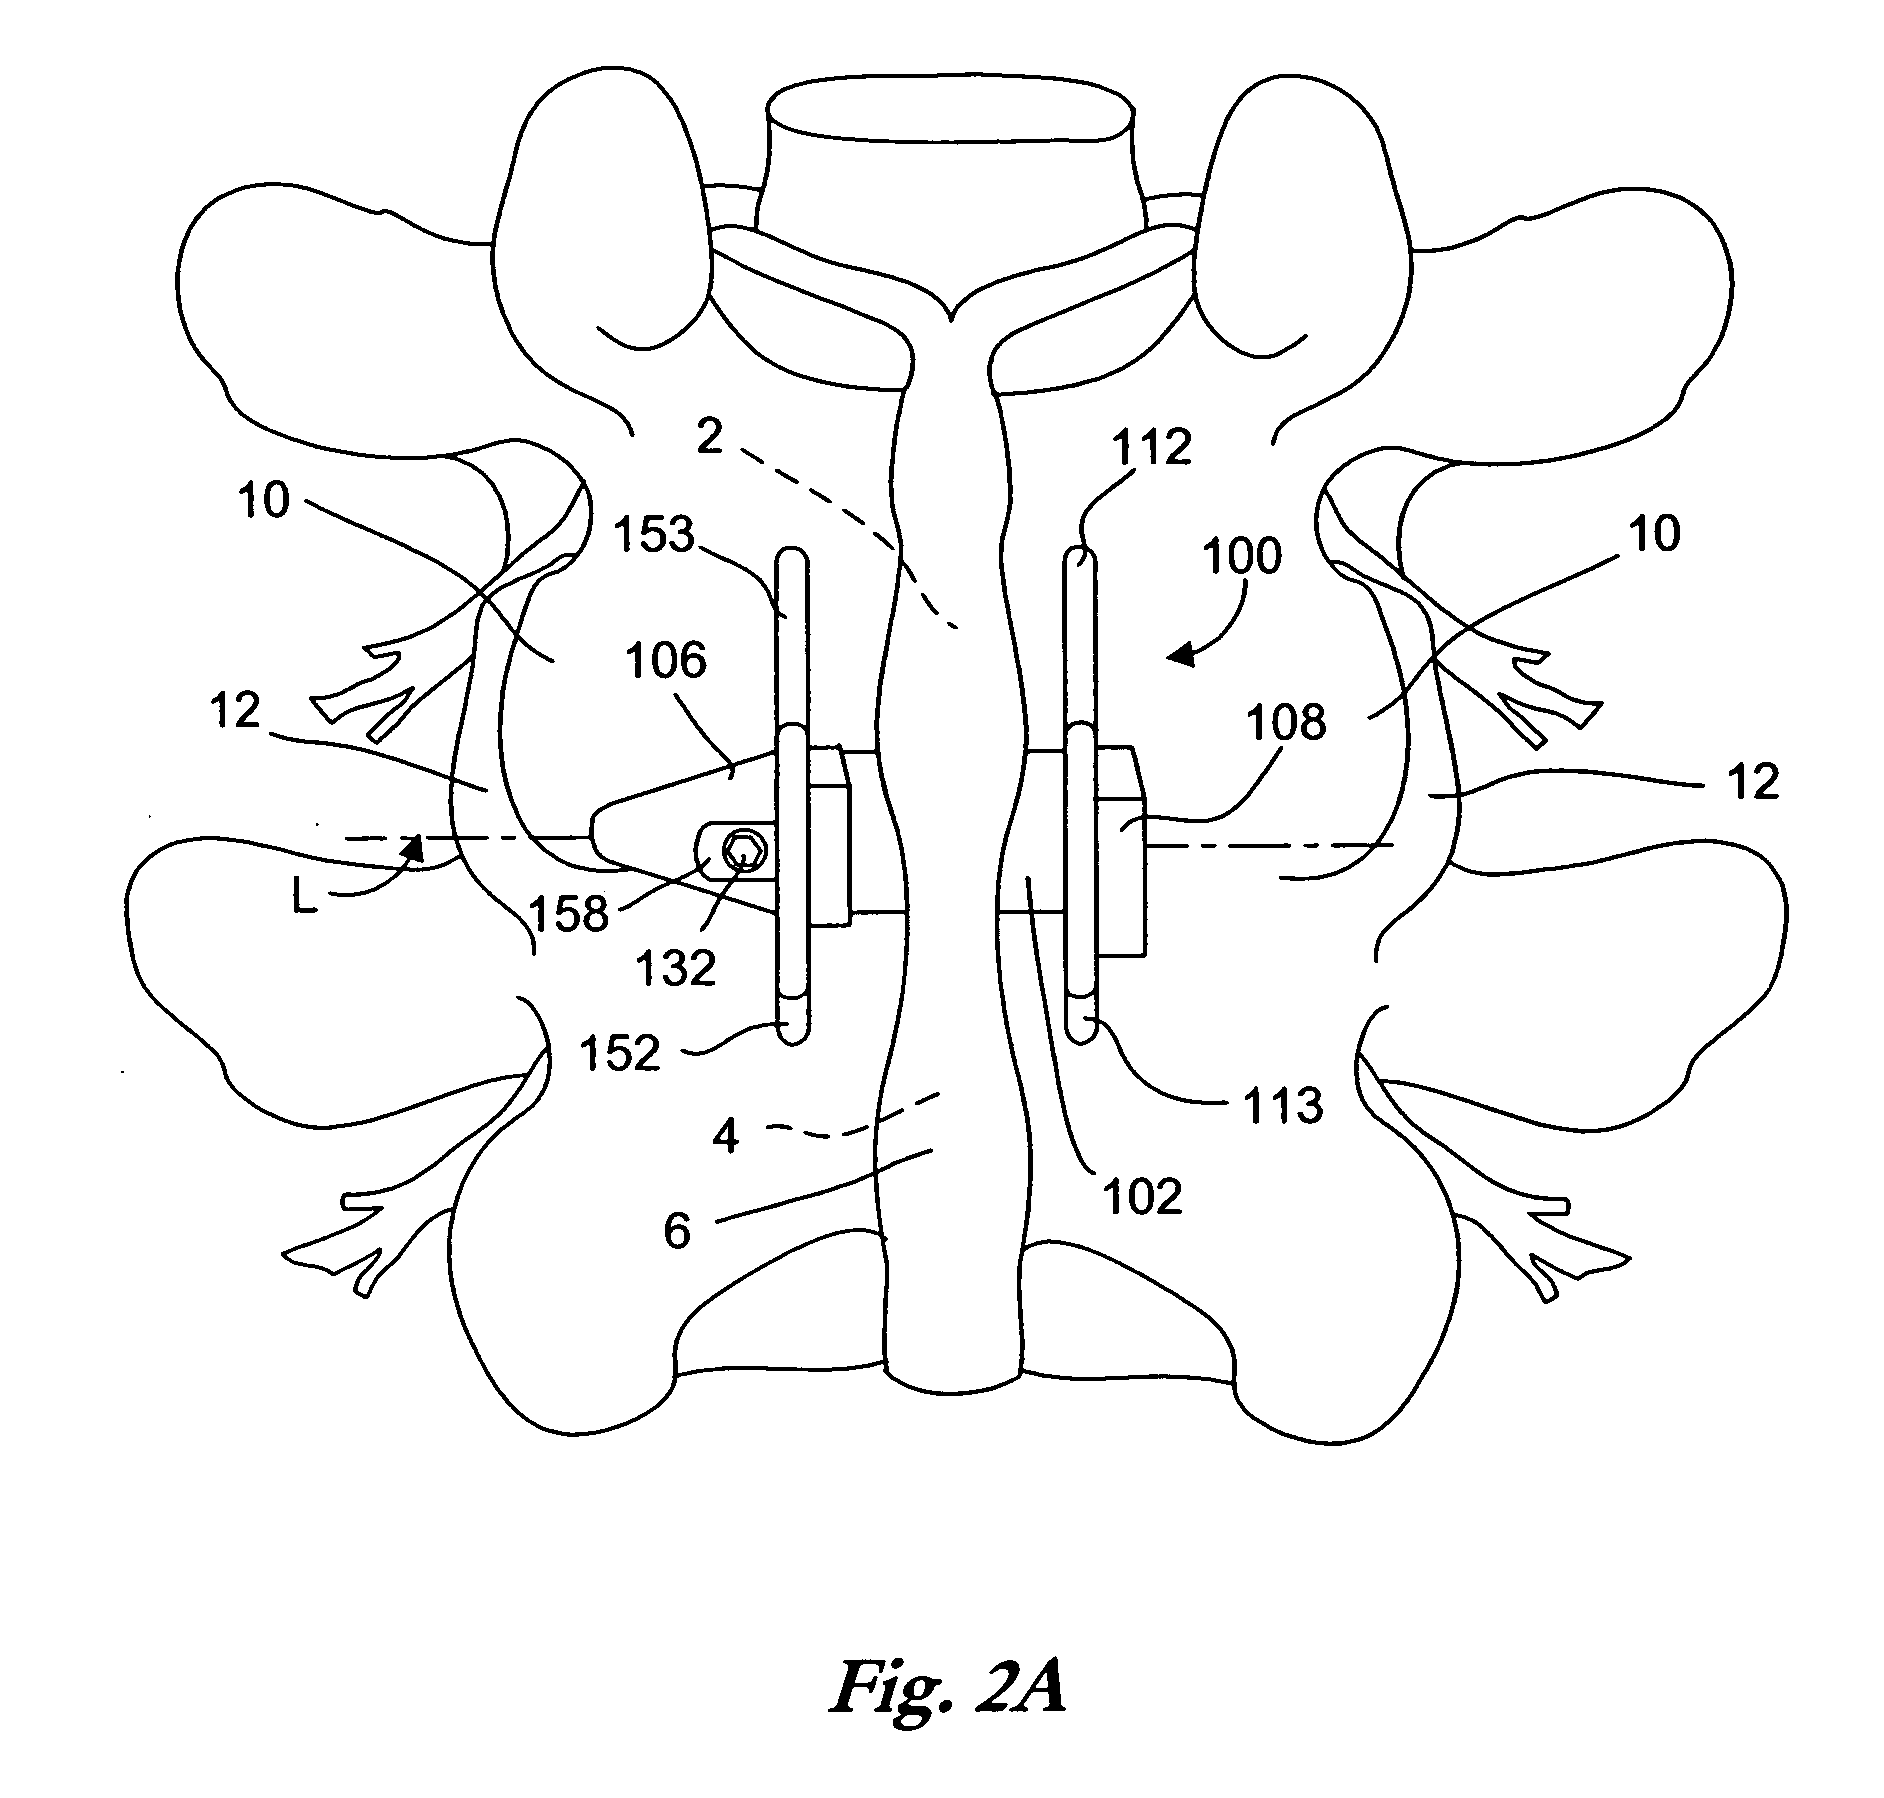 Interspinous process implant including a binder and method of implantation